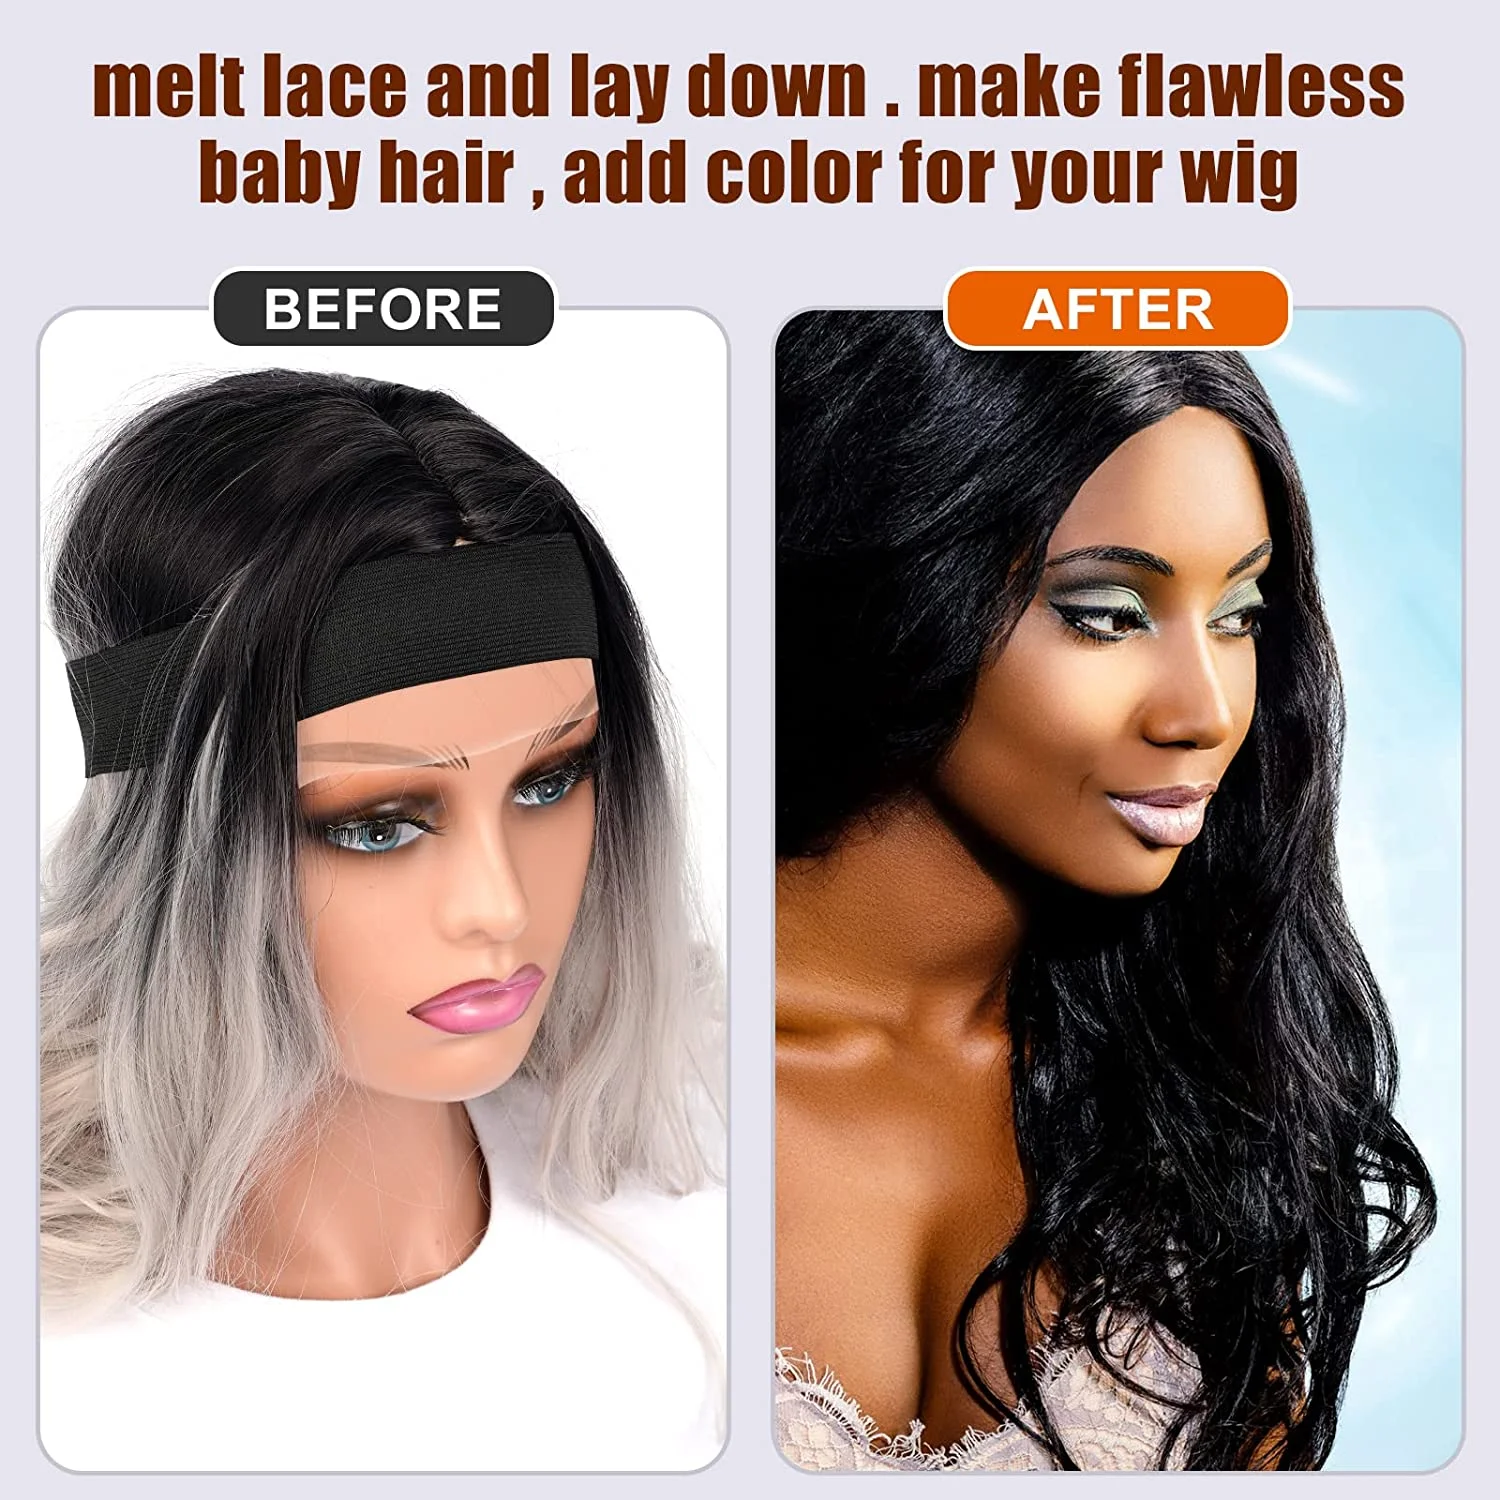 2pcs/Lot Wig Band for Laying Edges Adjustable Lace Melting Band for Making  Wigs Edge Laying Band for Keeping Wigs in Place Cheap - AliExpress